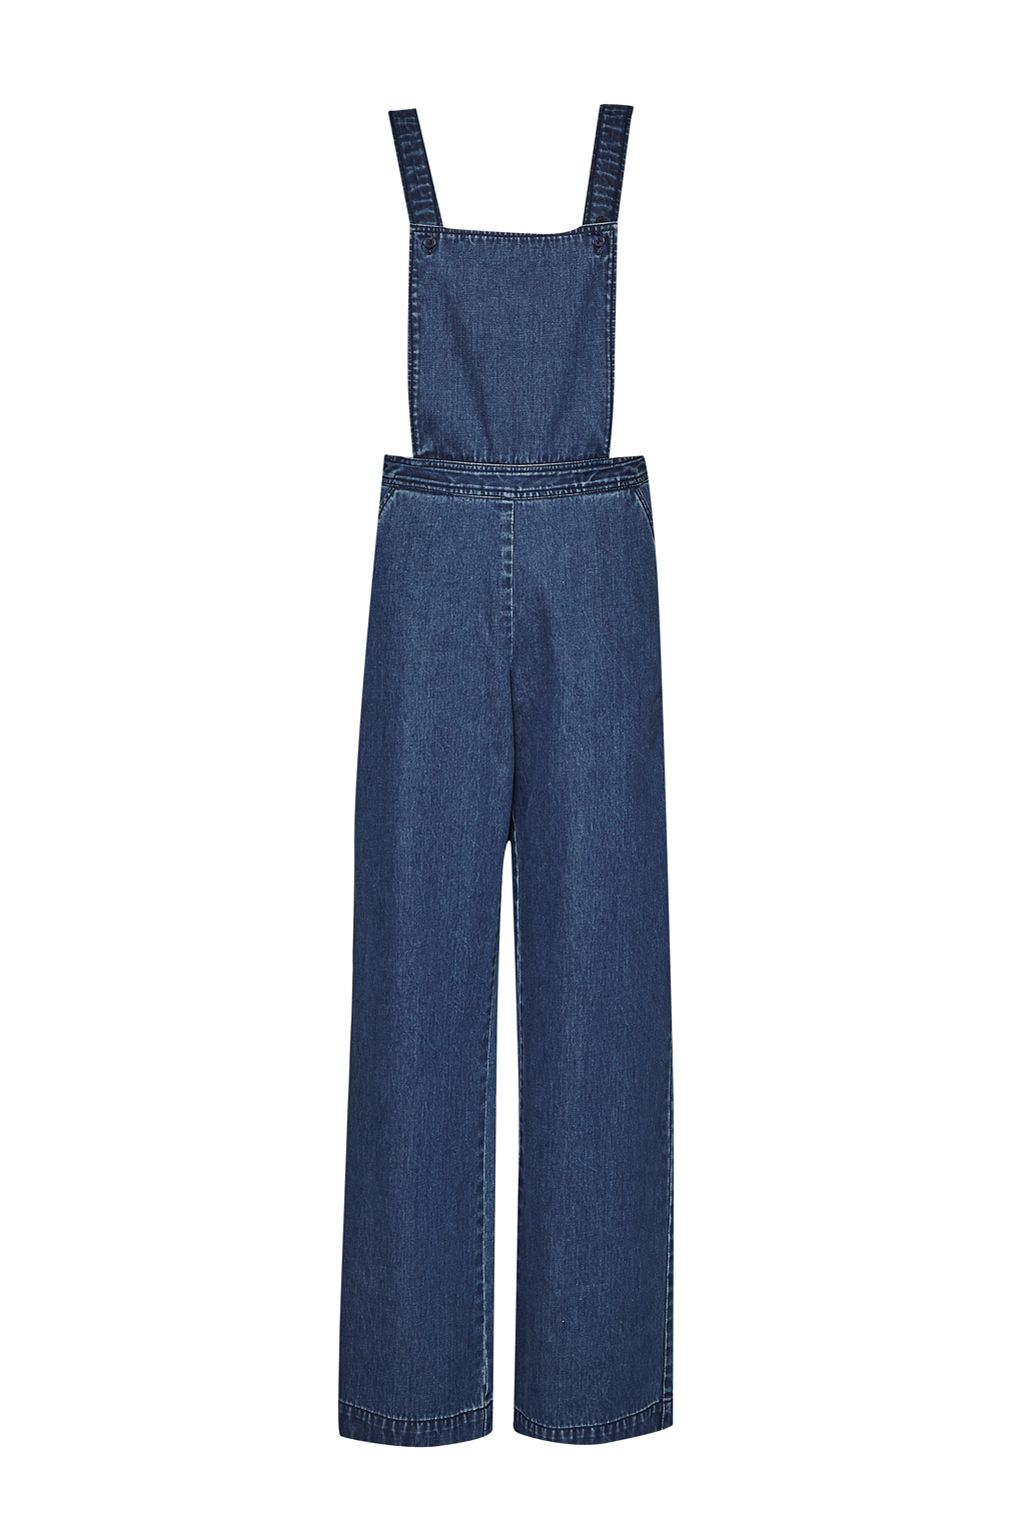 French connection Riviera Denim Wide Leg Dungarees in Blue | Lyst